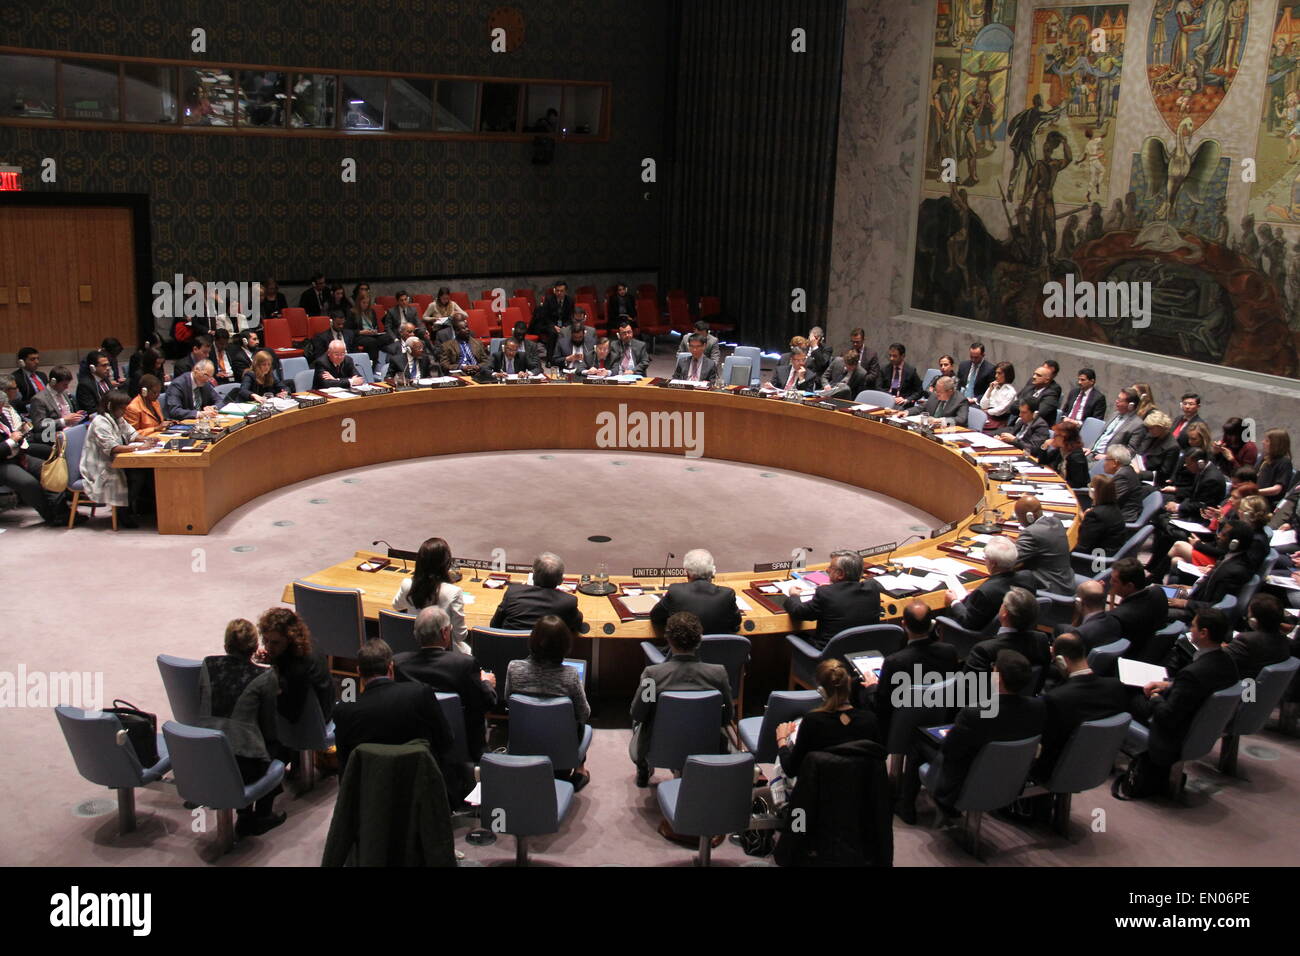 New York, USA. 24th Apr, 2015. The Photo taken on April 24, 2015 shows the general view of the Security Council meeting in New York, the United States, on April 24, 2015. Angelina Jolie Pitt, special envoy of the United Nations High Commissioner for Refugees, on Friday highlighted the need to help the Syrian refugees and provide them legal avenues to safety. © Shi Xiaomeng/Xinhua/Alamy Live News Stock Photo